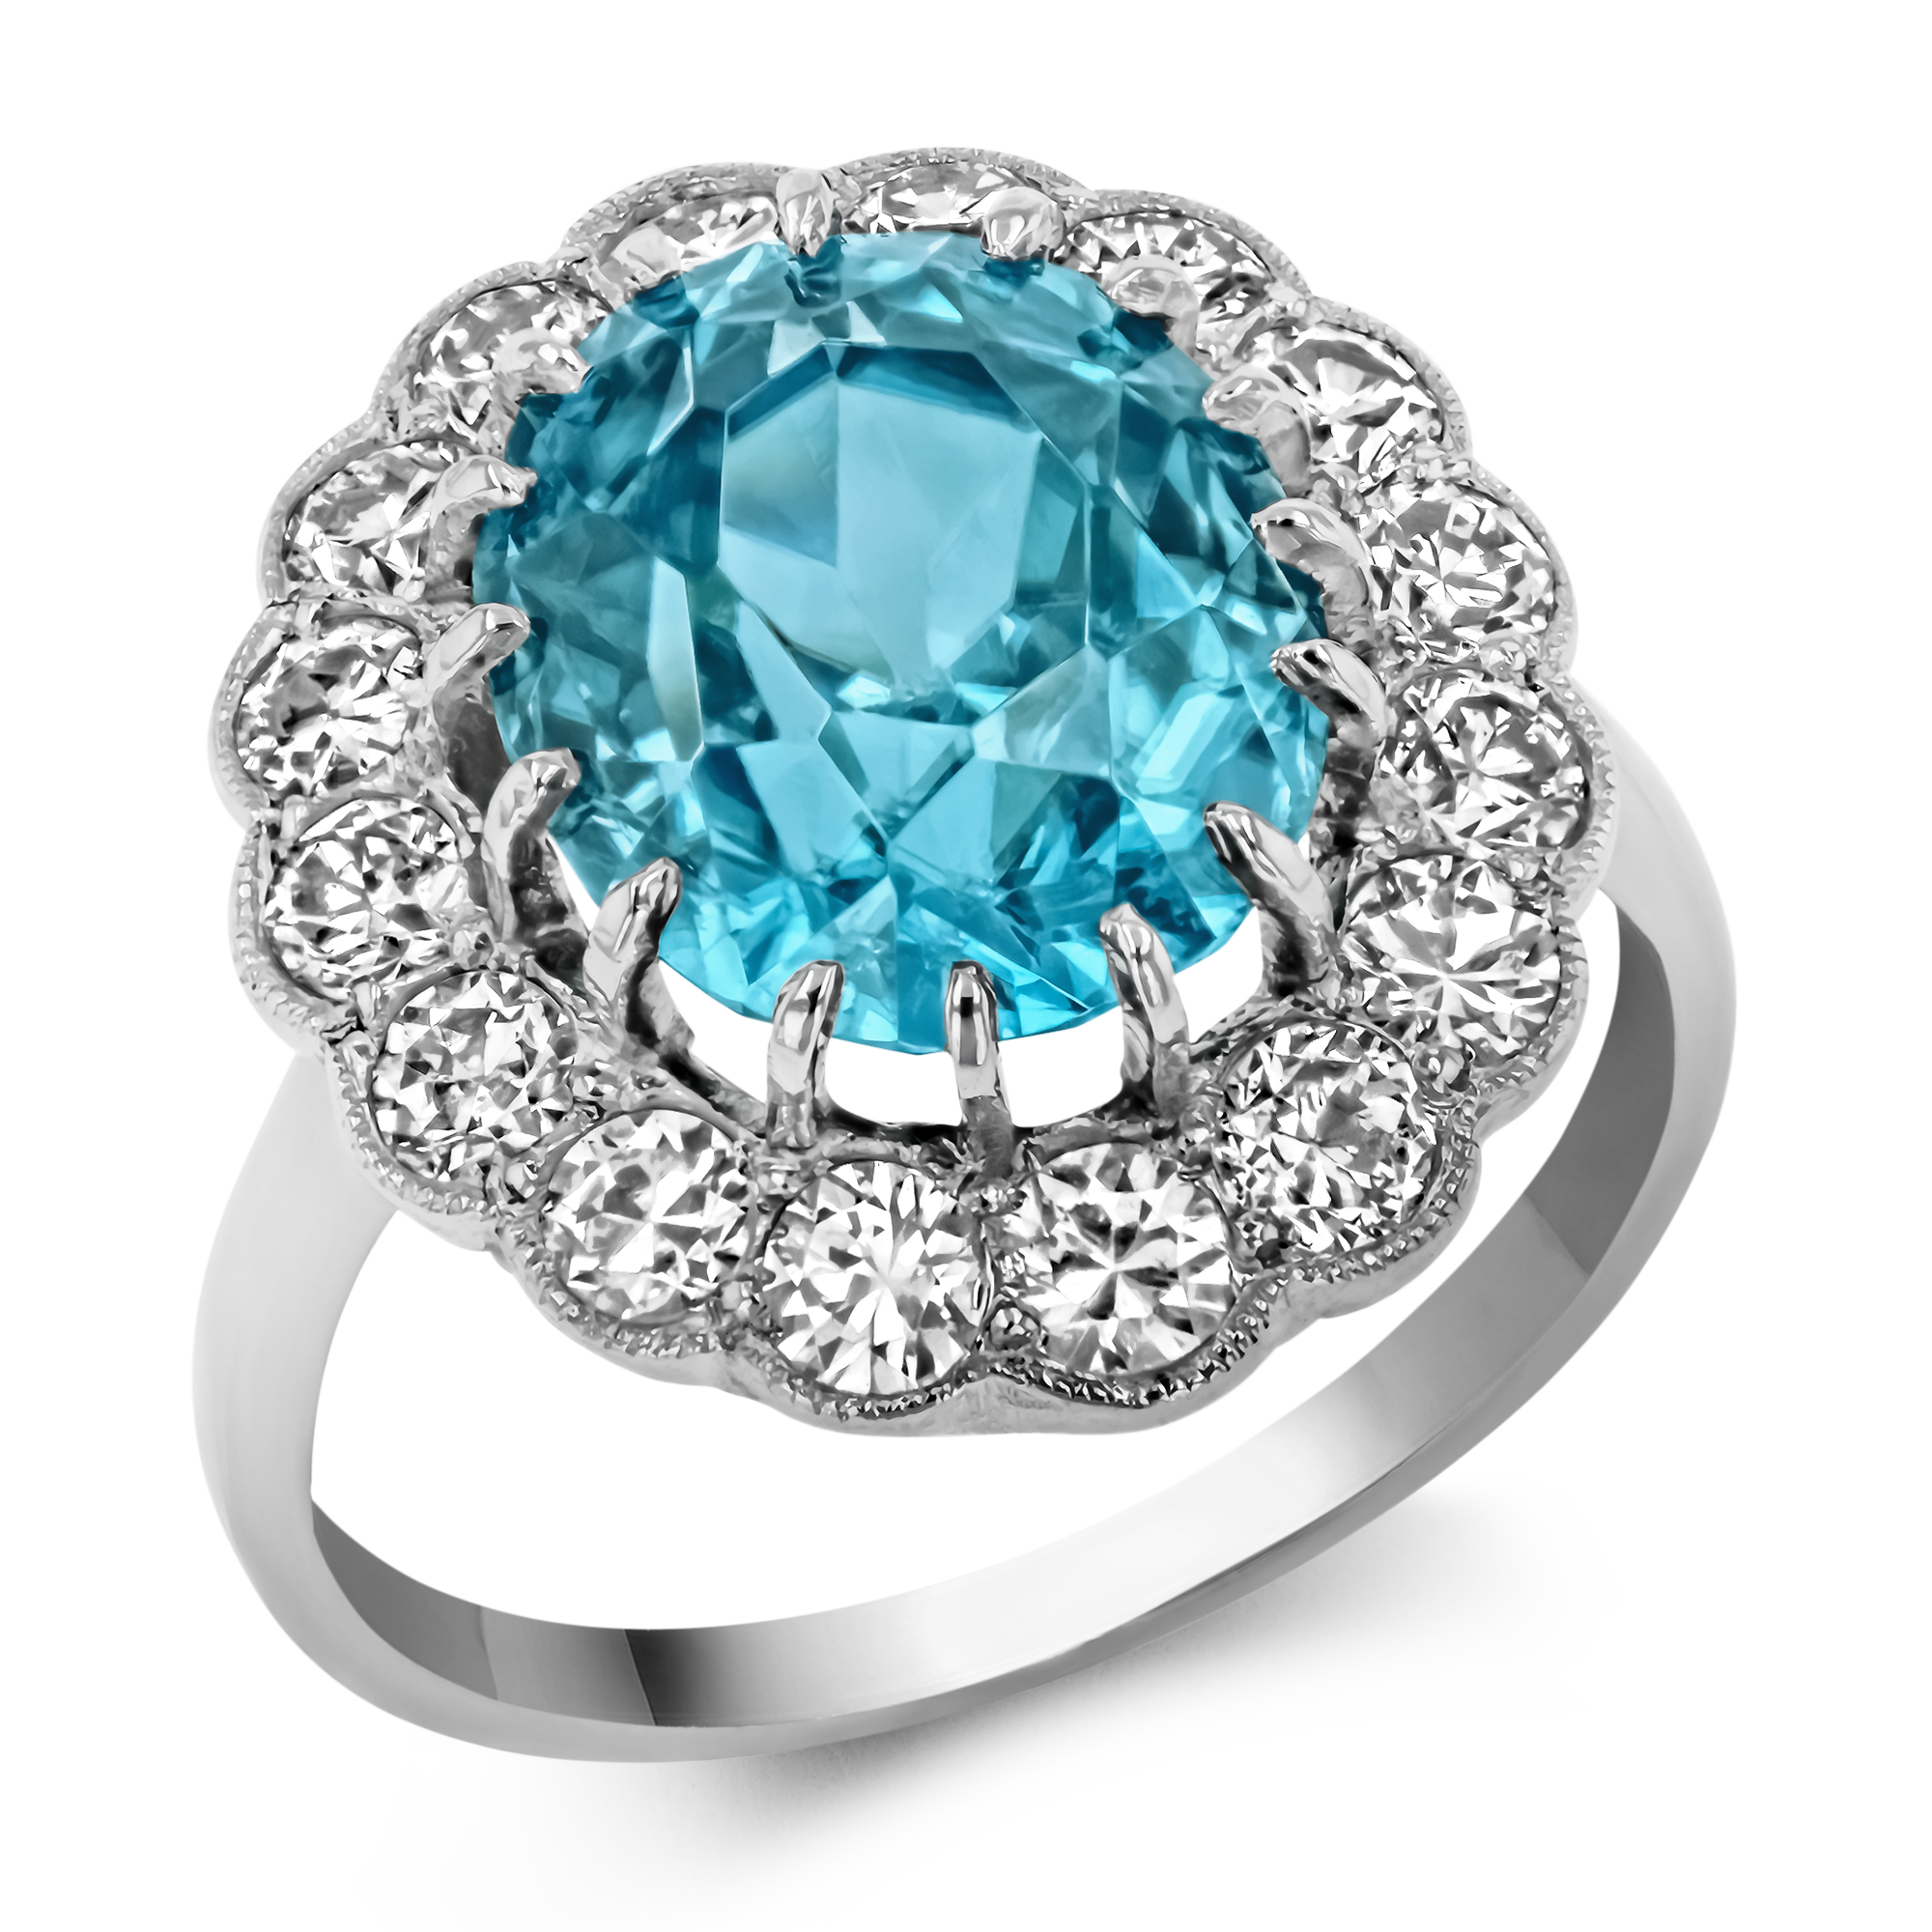 Oval Cut 7.81ct Blue Zircon and Diamond Cluster Ring Oval Cut, Claw Set_1